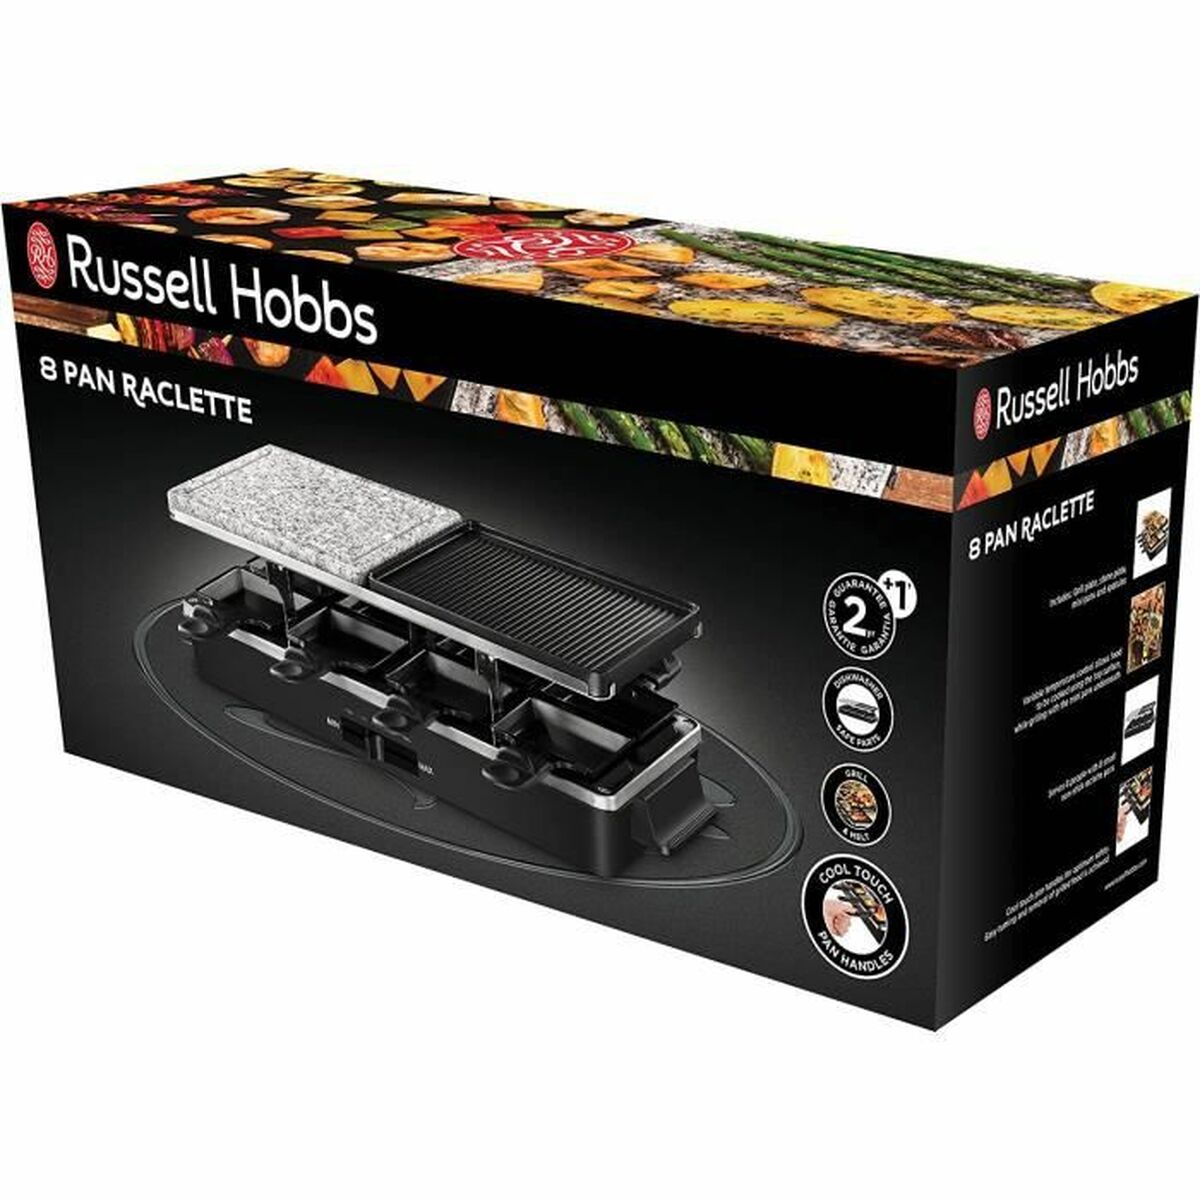 Griddle Plate Russell Hobbs Raclette Black